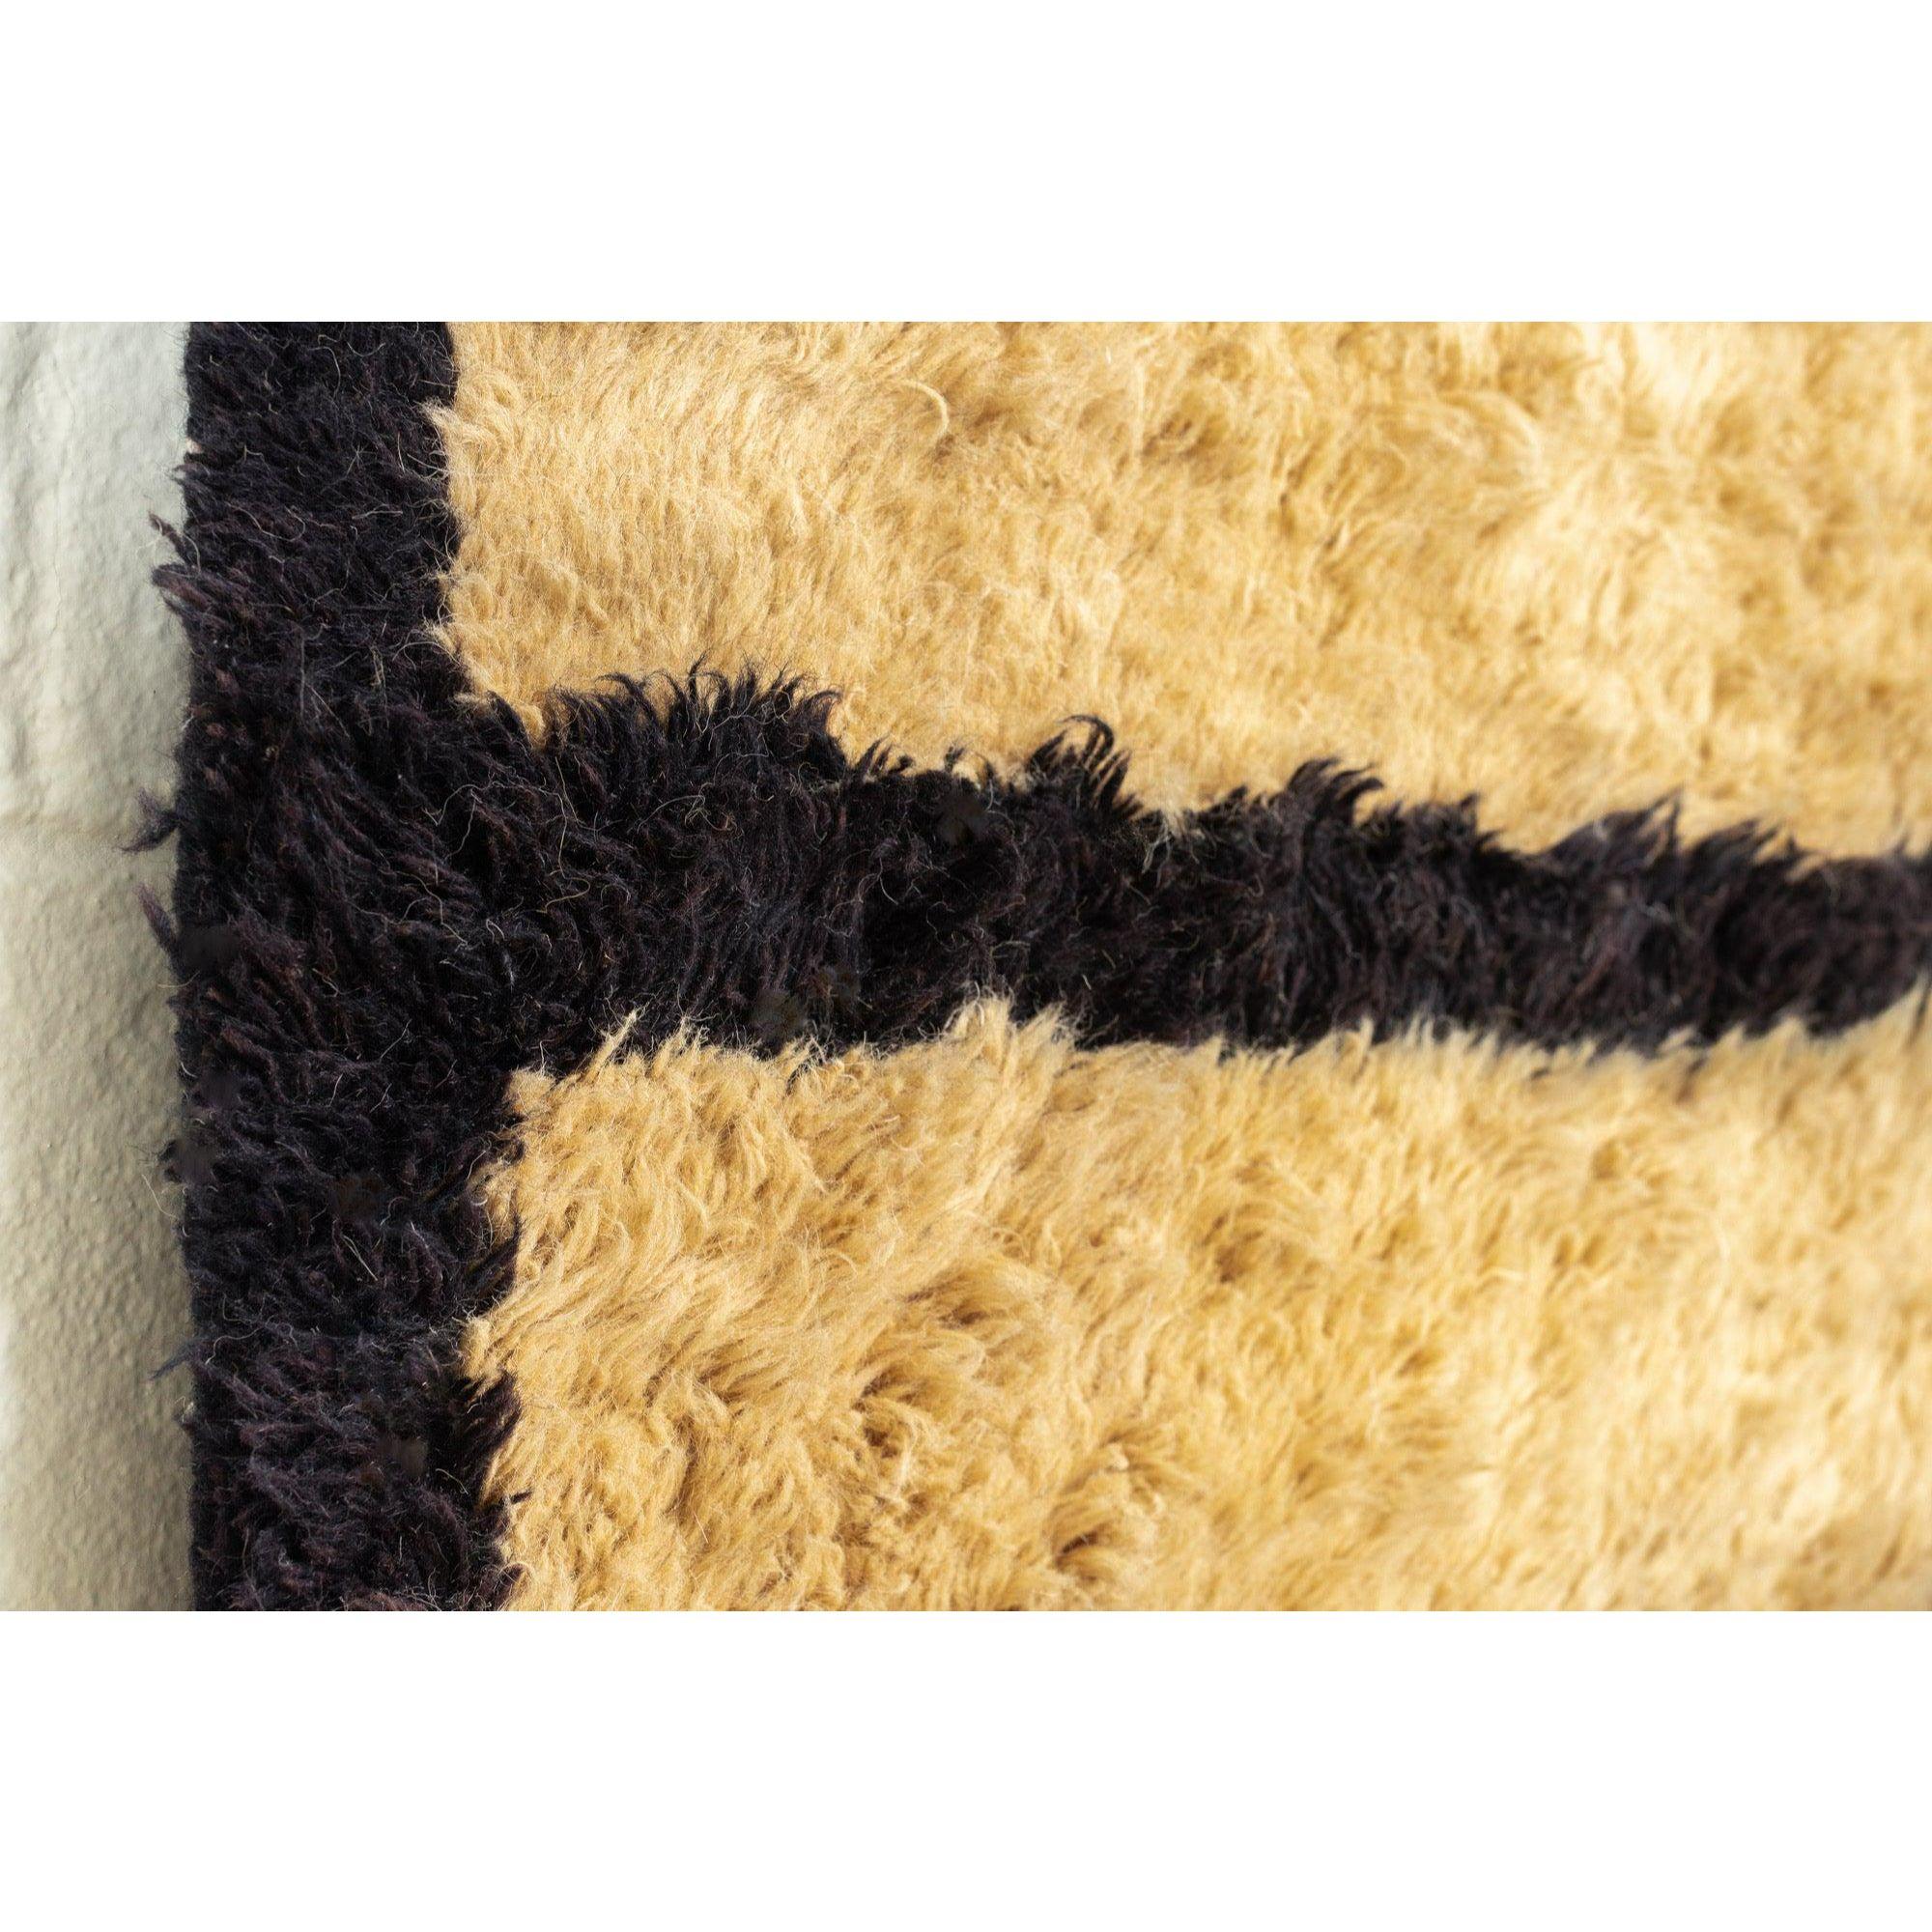 Vintage Turkish Floor Rug in Beige and Black Striped Shaggy Wool For Sale 2